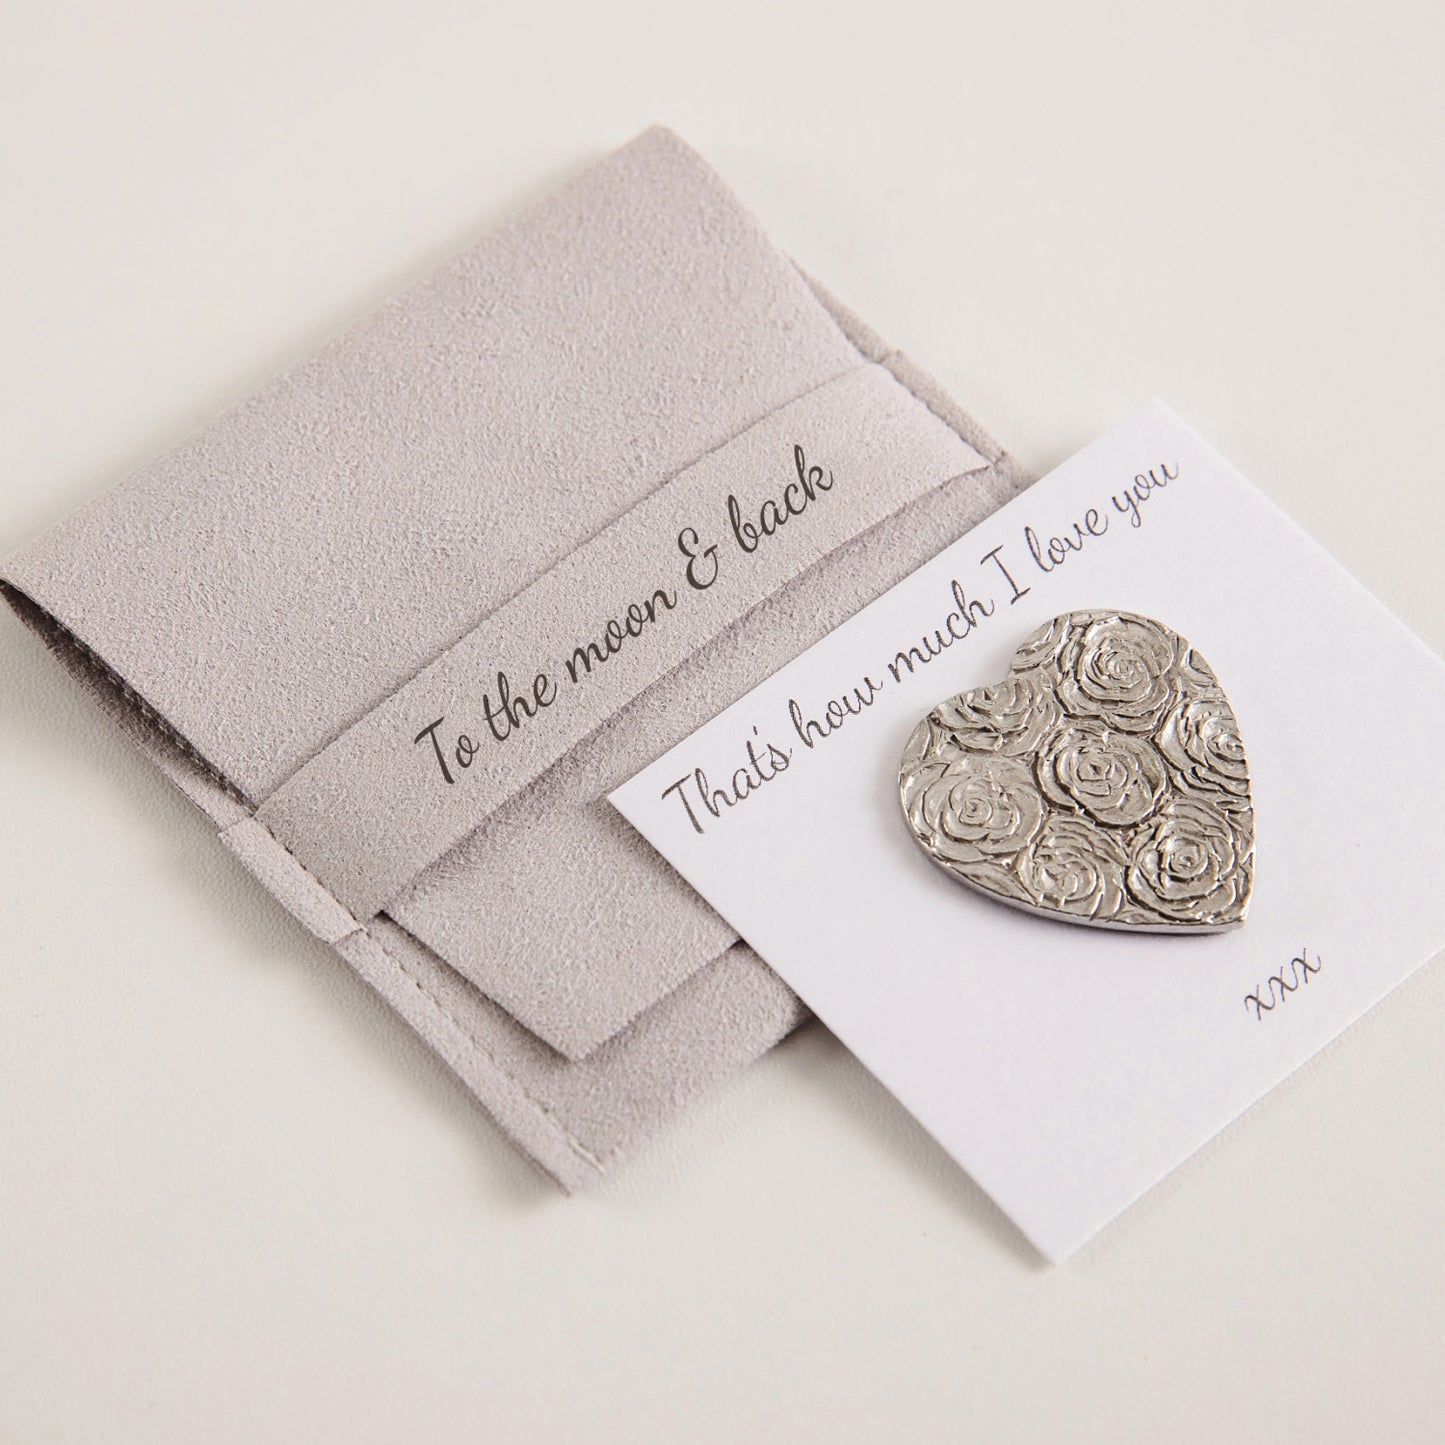 To The Moon & back Heart Pewter Pocket Charm